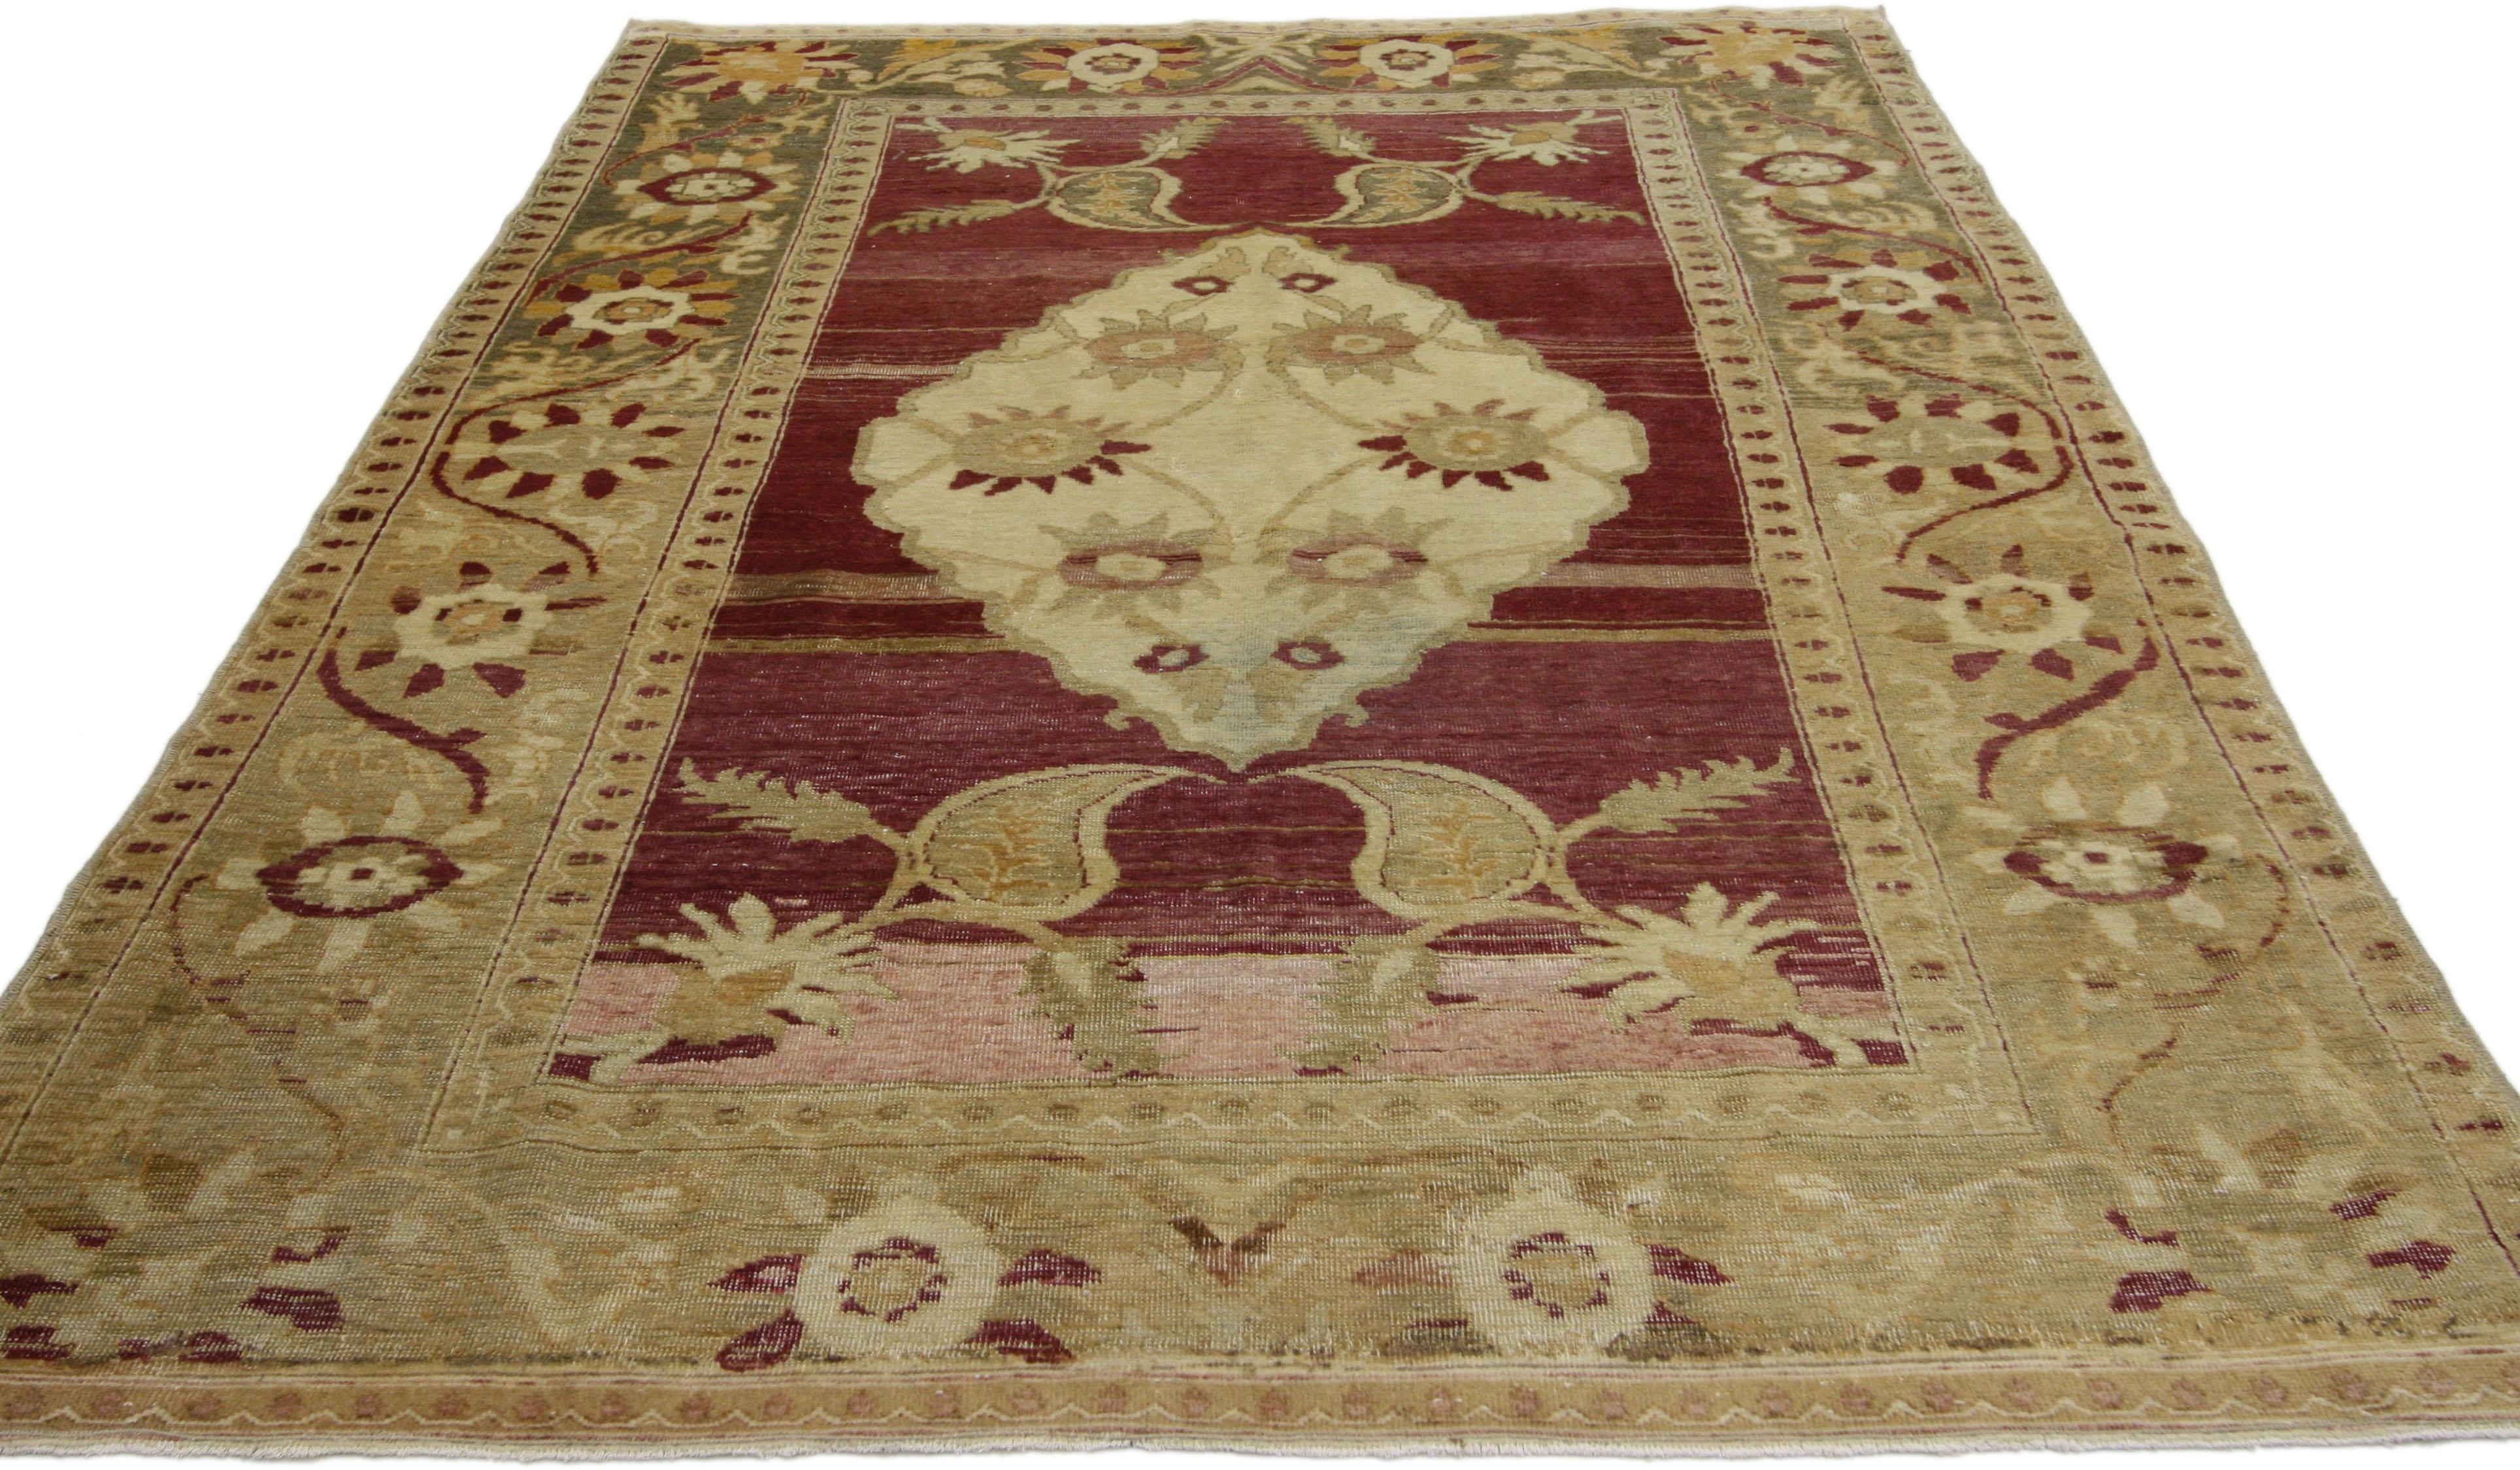 52299, vintage Turkish Oushak rug with modern tribal style, Entry or Foyer rug. This hand-knotted wool vintage Turkish Oushak rug features a lozenge medallion with scalloped edges in an abrashed field. The medallion is filled with blooming six